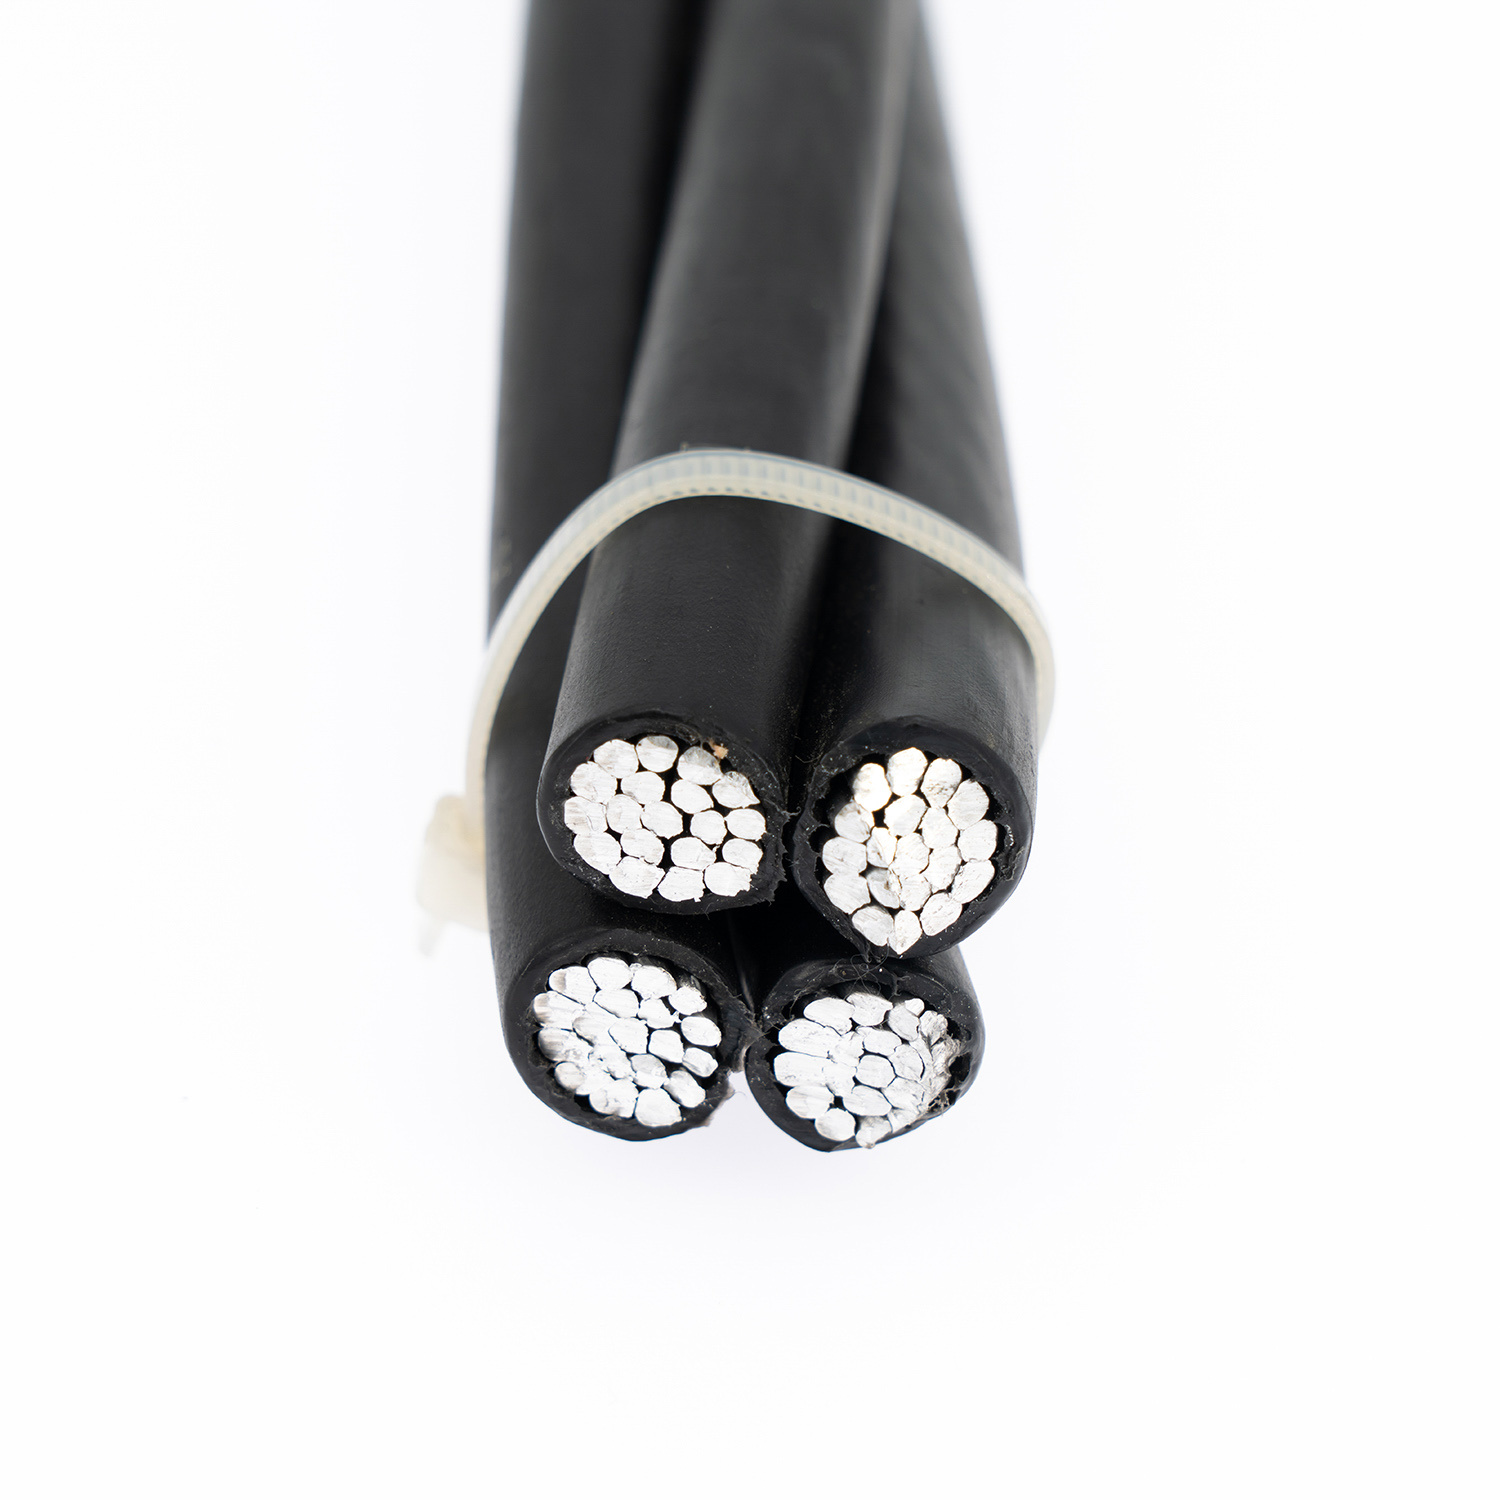 Jklyj Different Size Aerial Bundled ABC Cable XLPE Insulated Aluminum Core